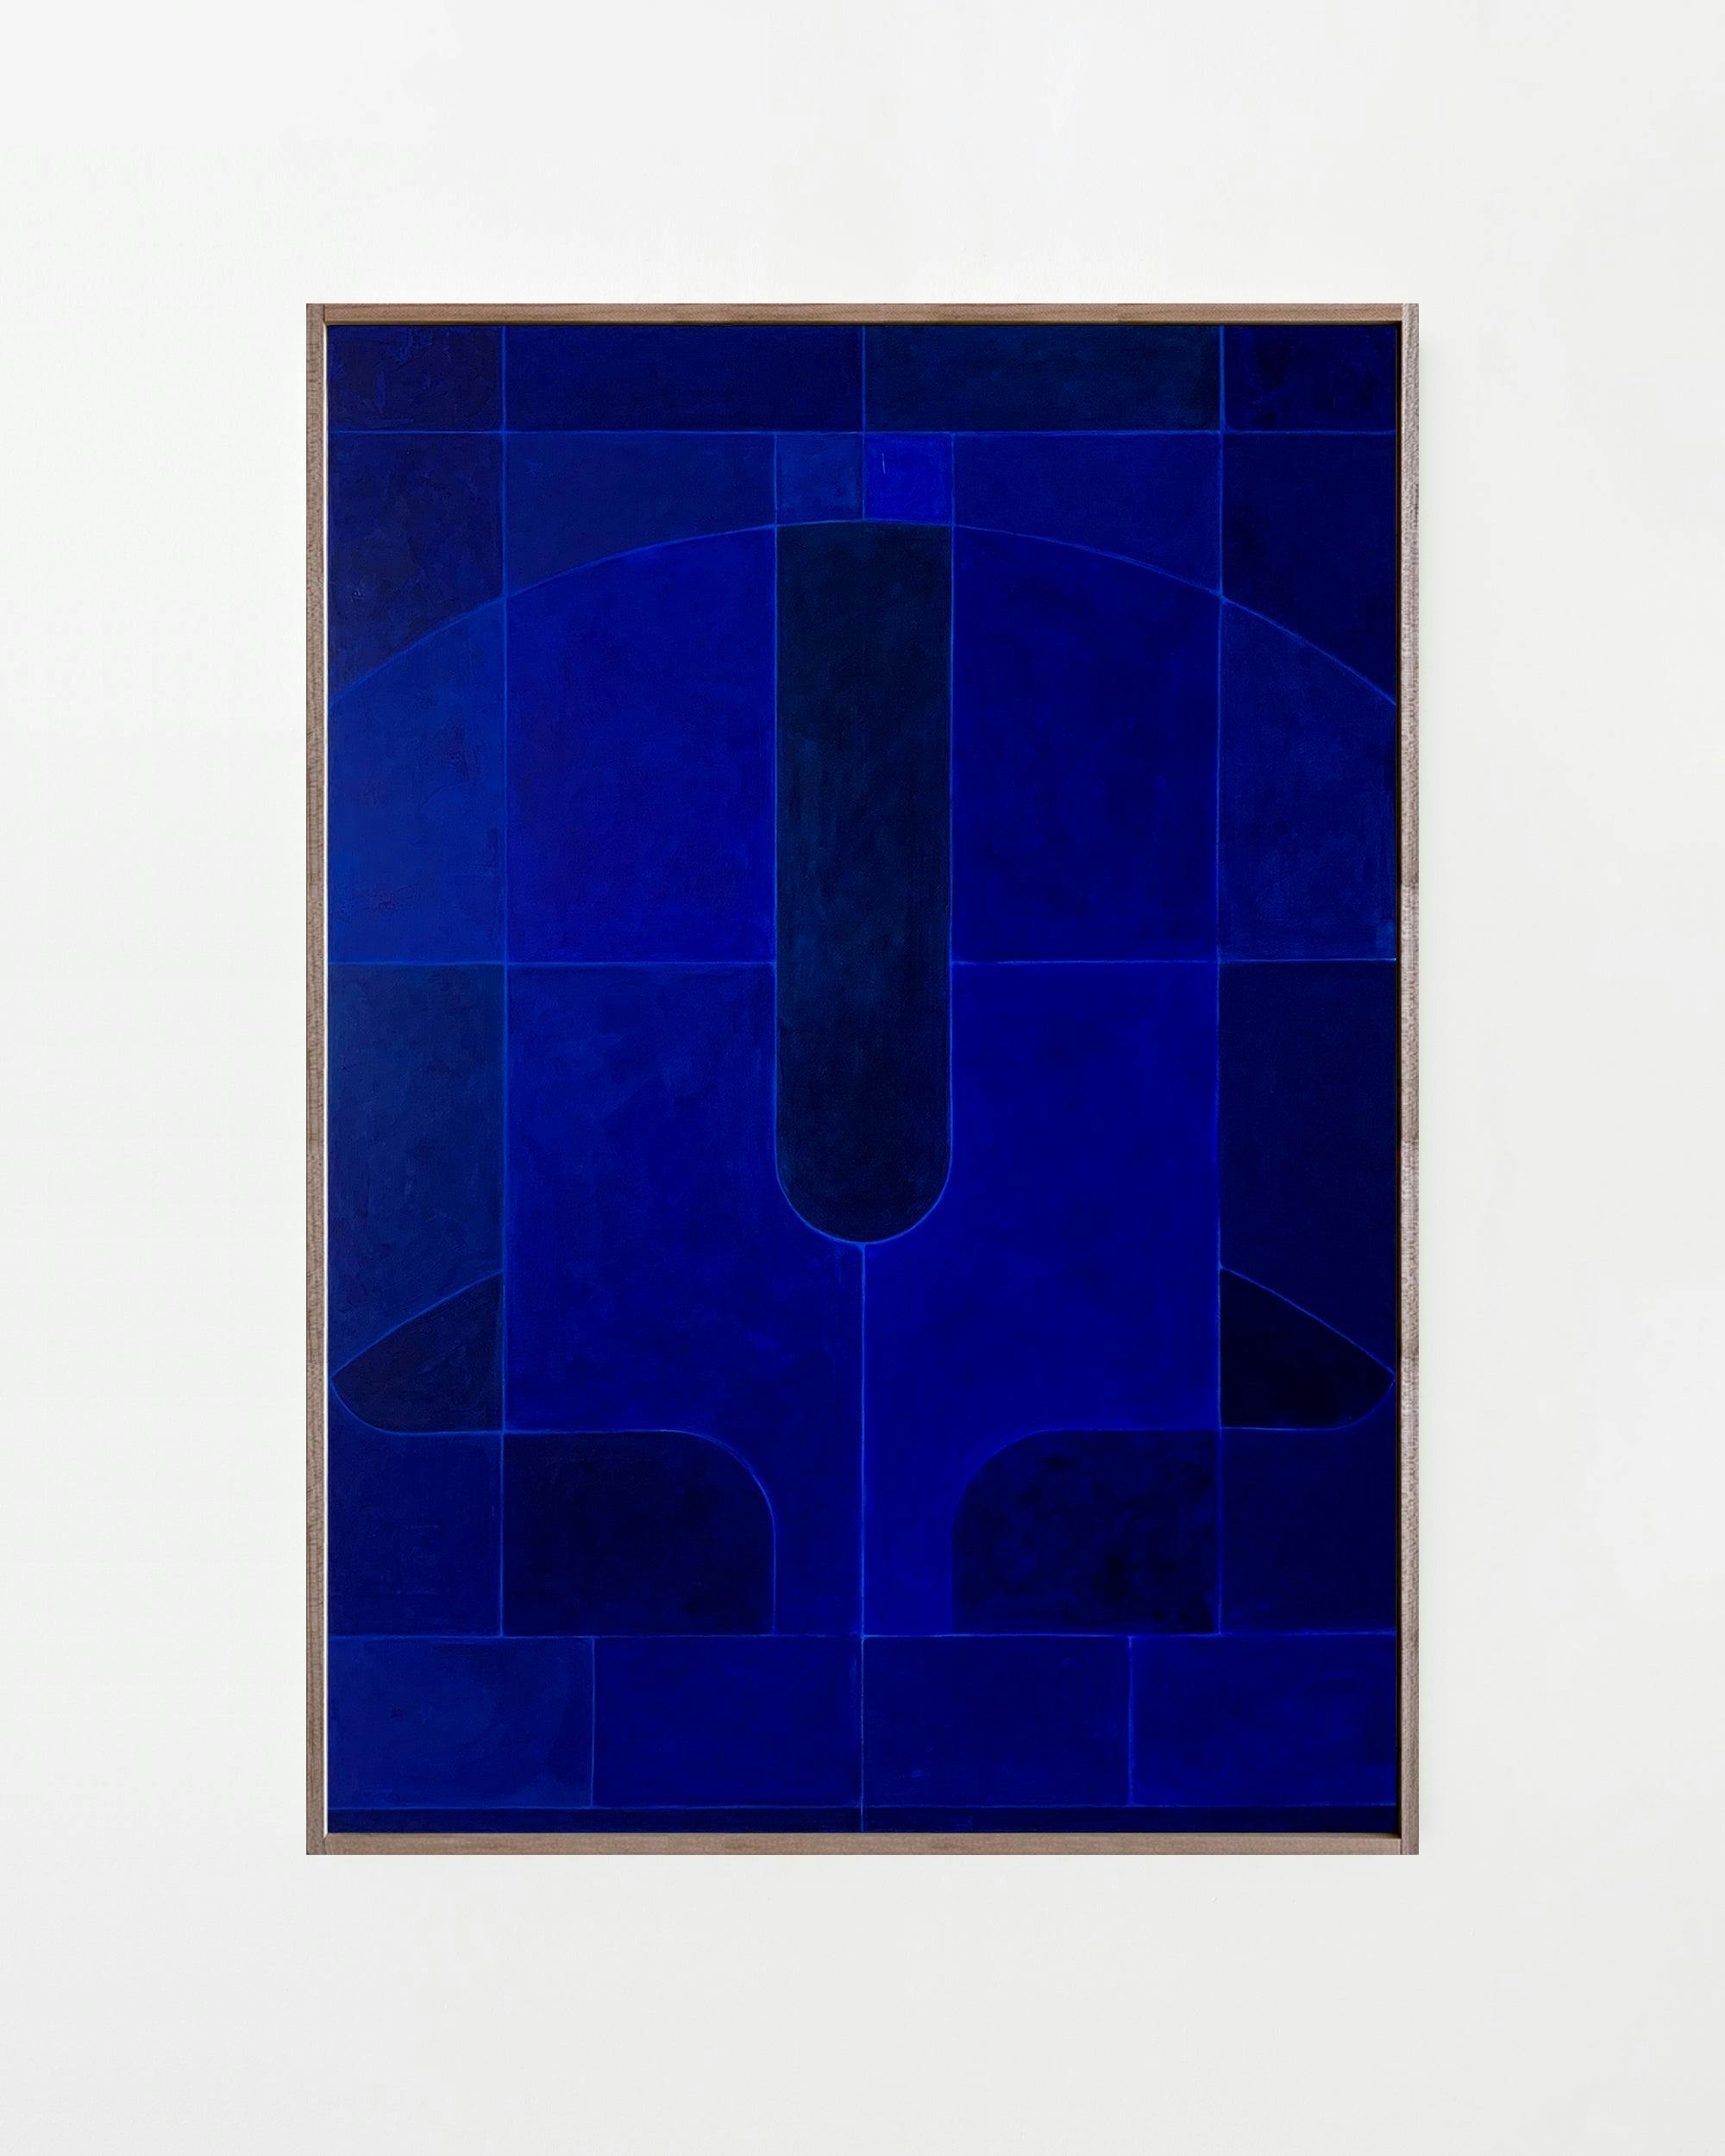 Painting by Carla Weeks titled "Big Window in French Ultramarine".